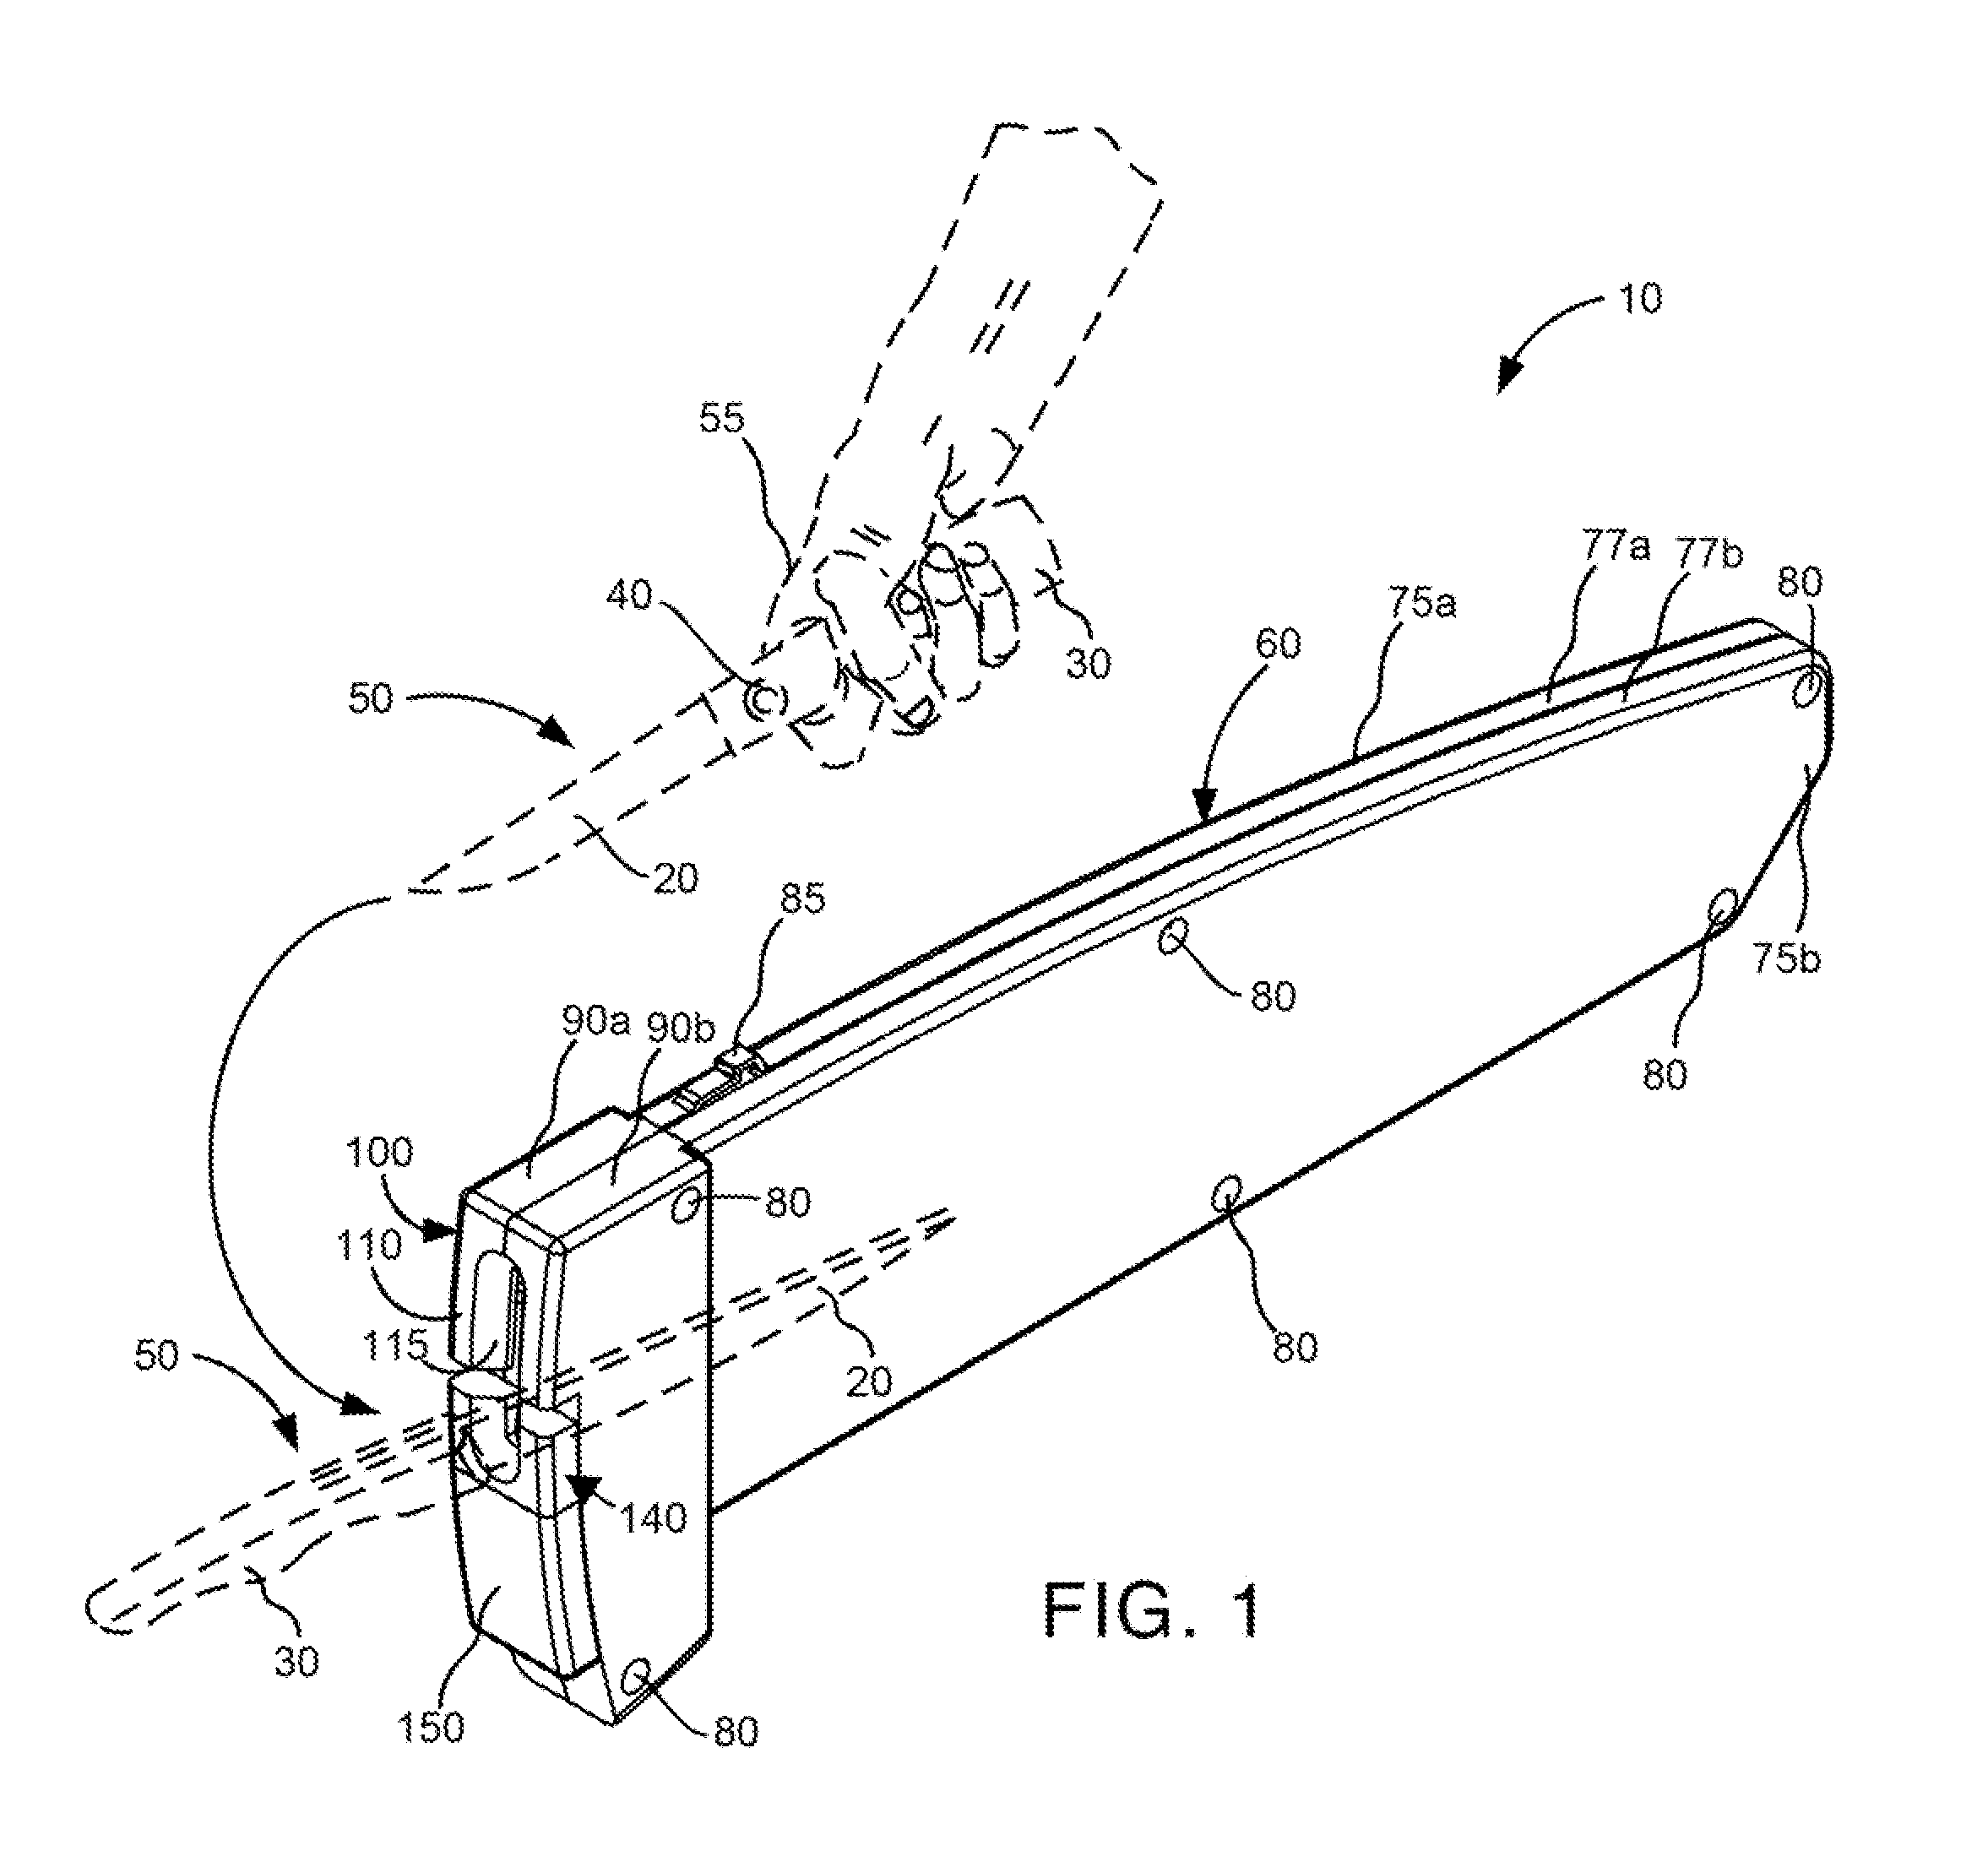 Adjustable knife holder adapted to maintain sharpness of a knife blade and method of manufacturing the adjustable knife holder